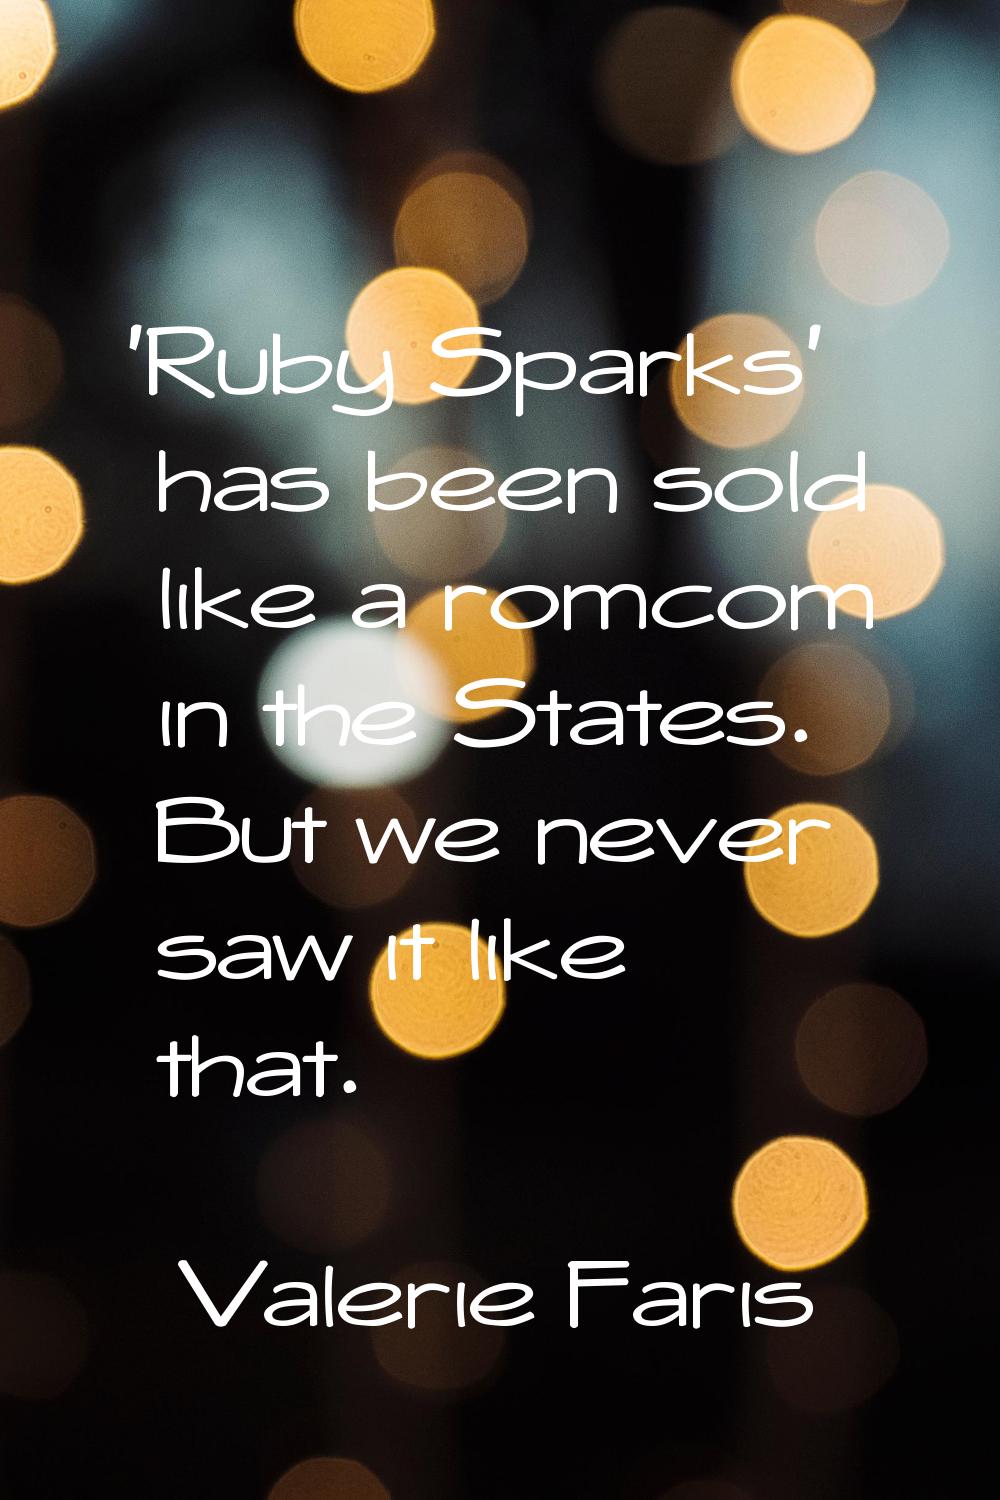 'Ruby Sparks' has been sold like a romcom in the States. But we never saw it like that.